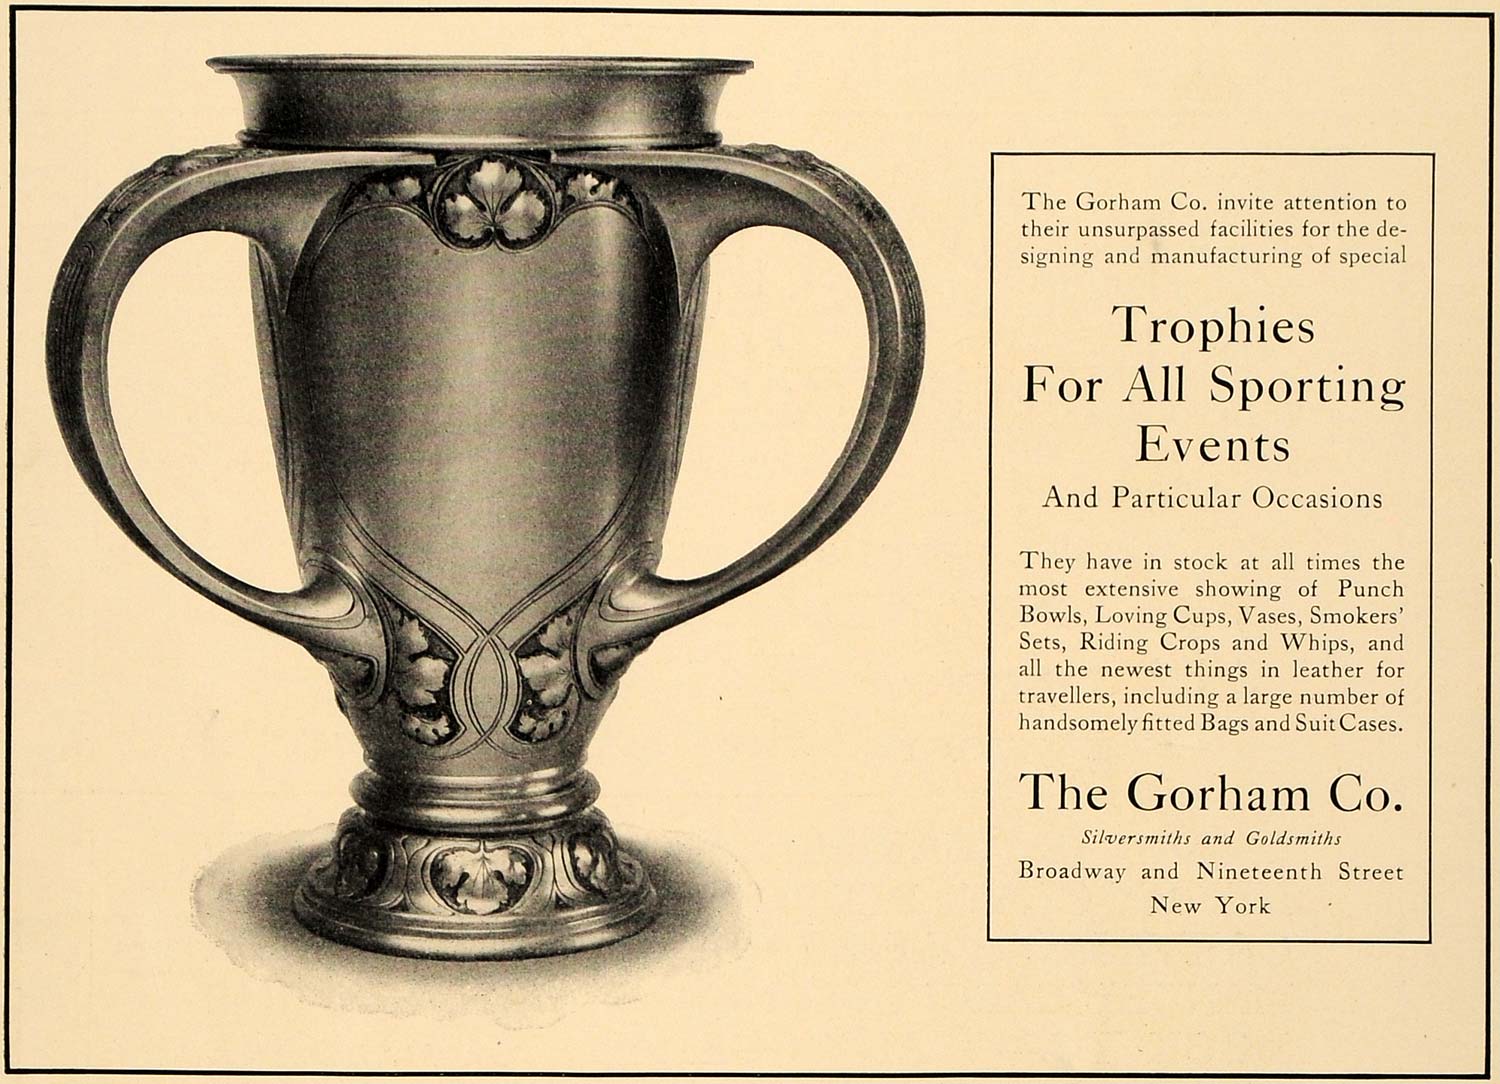 1905 Ad Trophies Sporting Events Gorham Company Vases - ORIGINAL ADVERTISING CL4